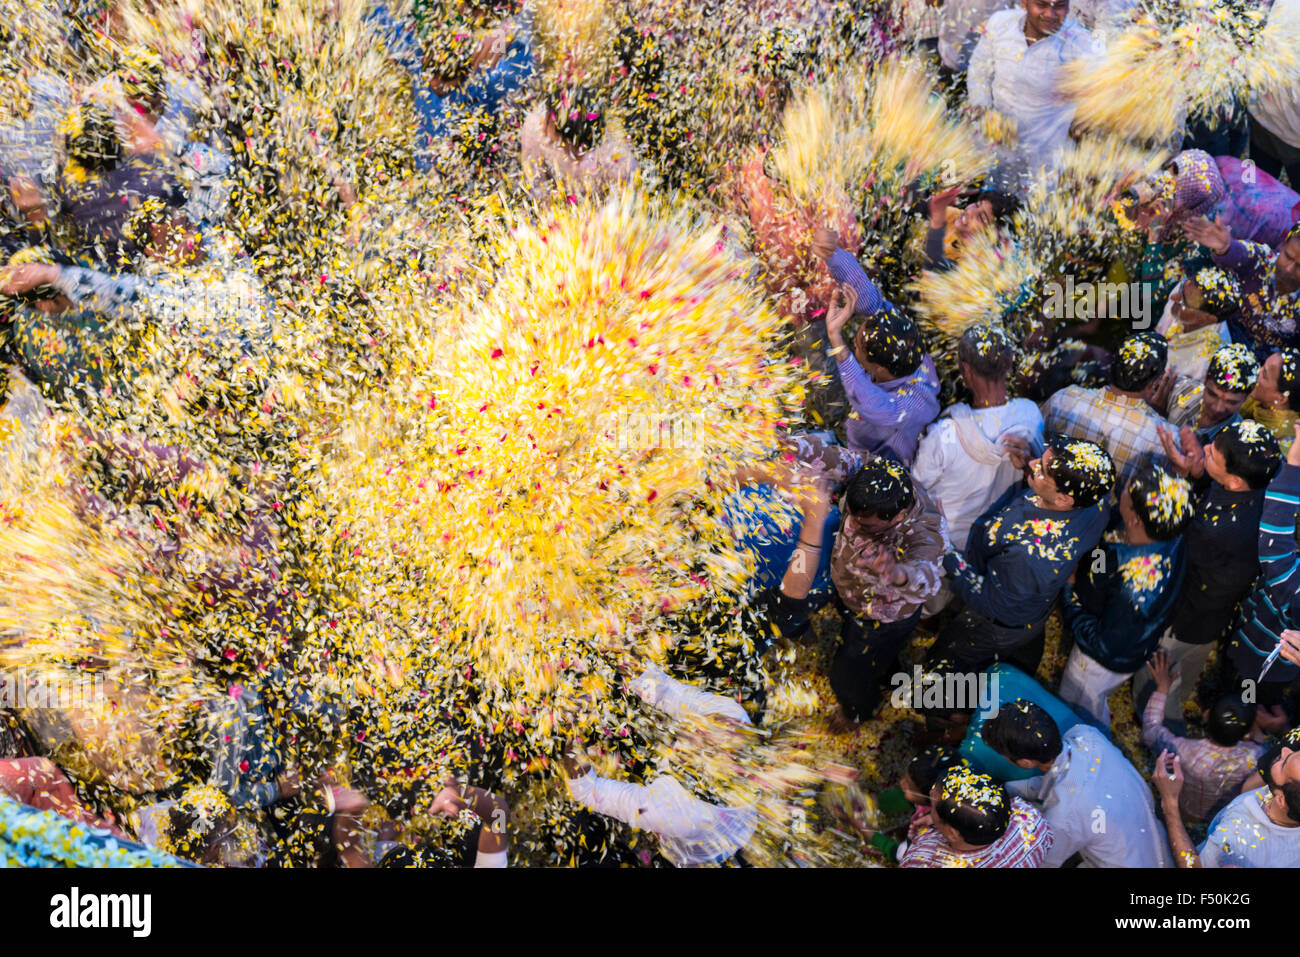 Many pilgrims, women and men, are celebrating a ritual, pooja, by throwing flowers in the air on the ghats at the holy river Yam Stock Photo